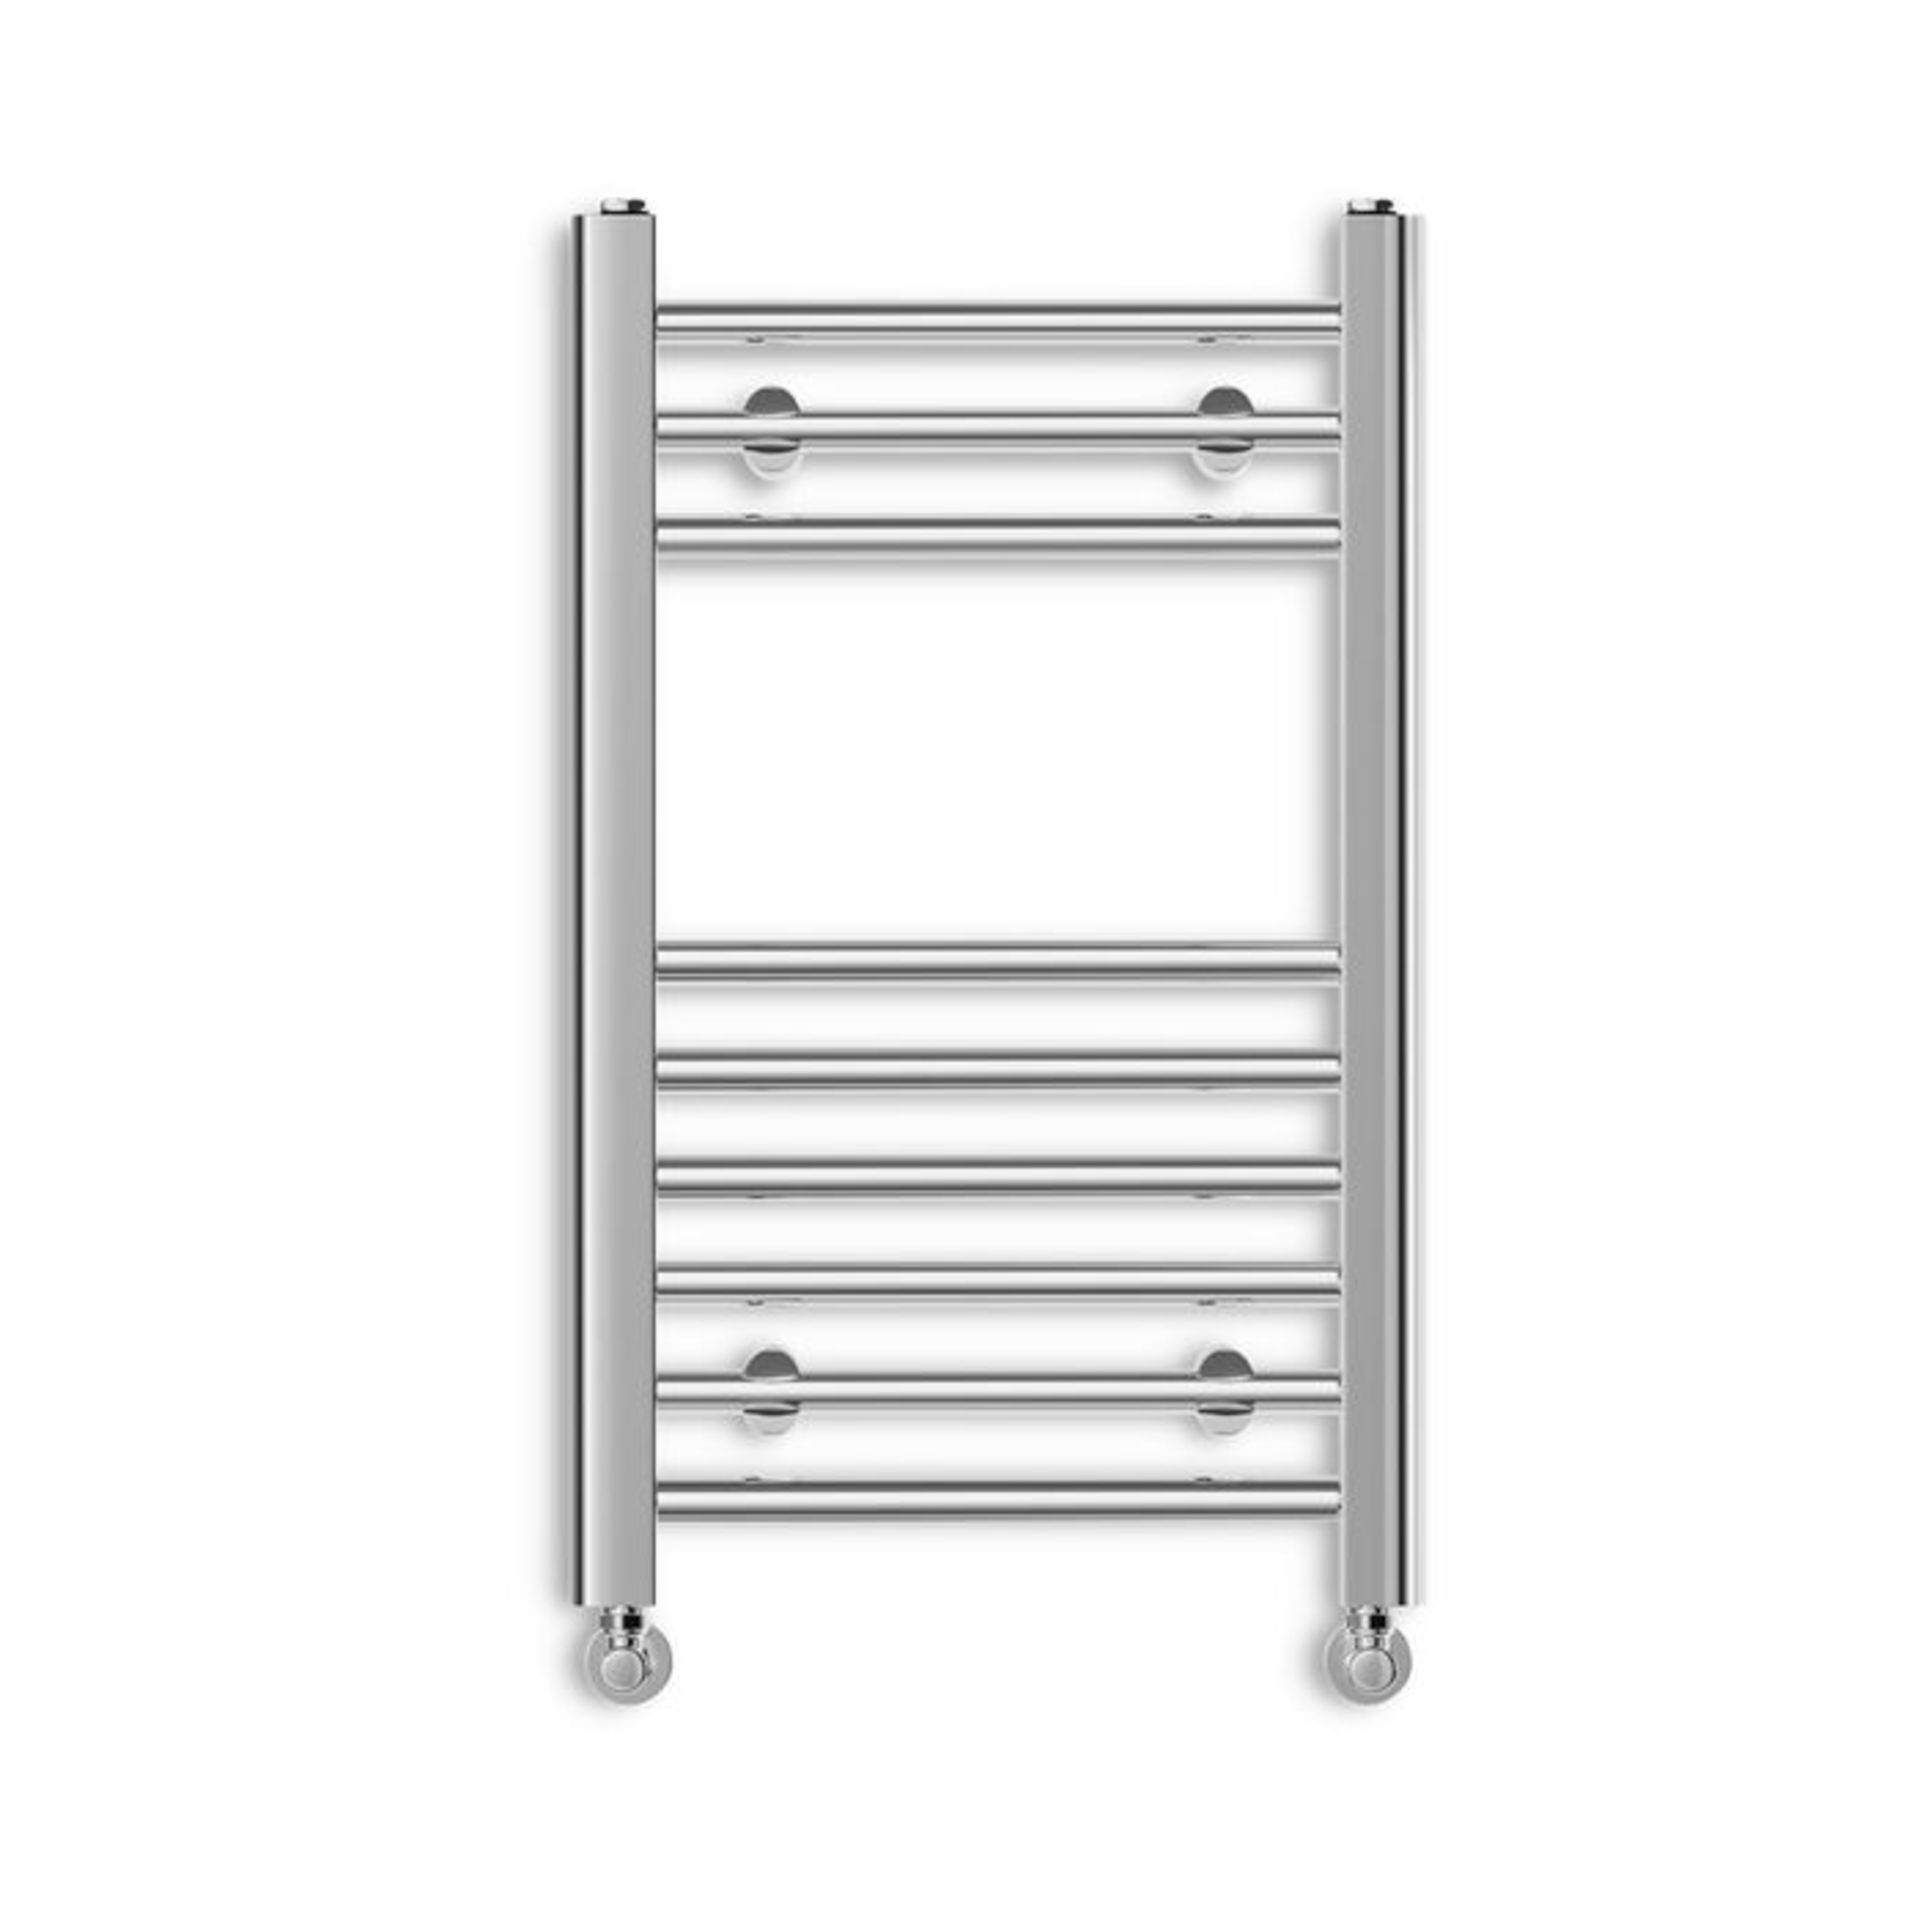 (KL101) 650x400mm Straight Heated Towel Radiator. RRP £44.00. Low carbon steel chrome plated - Image 2 of 3